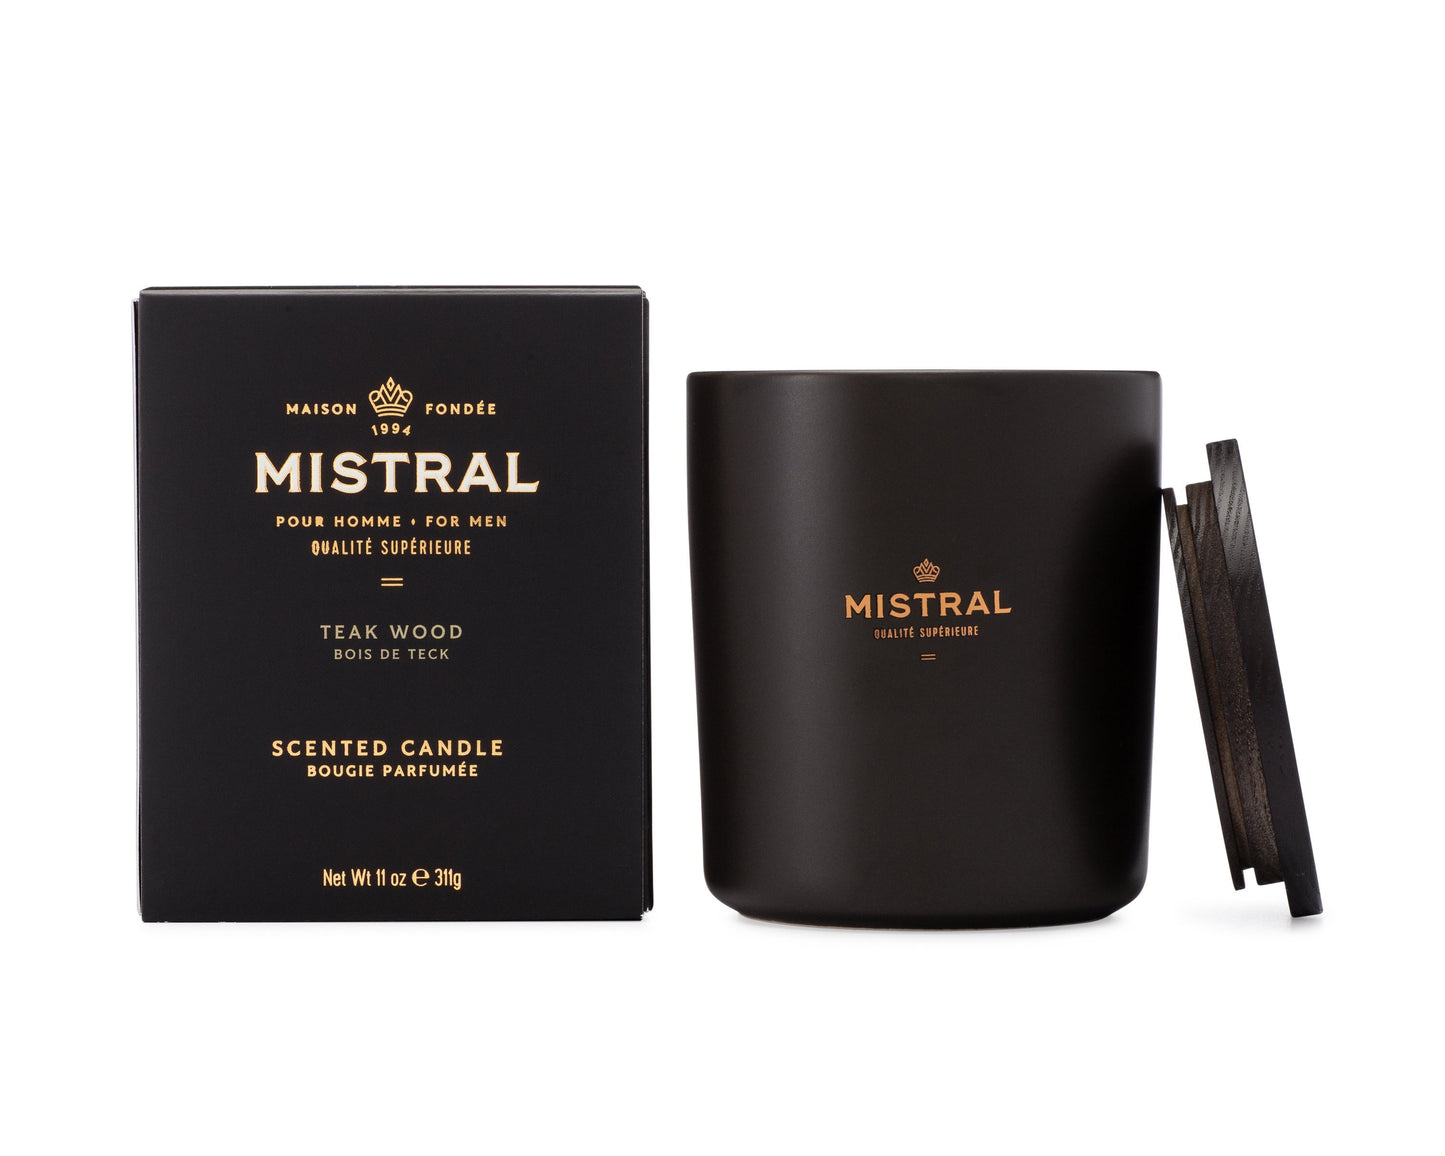 Mistral Masculine Candle at 6Whiskey six whisky teak wood